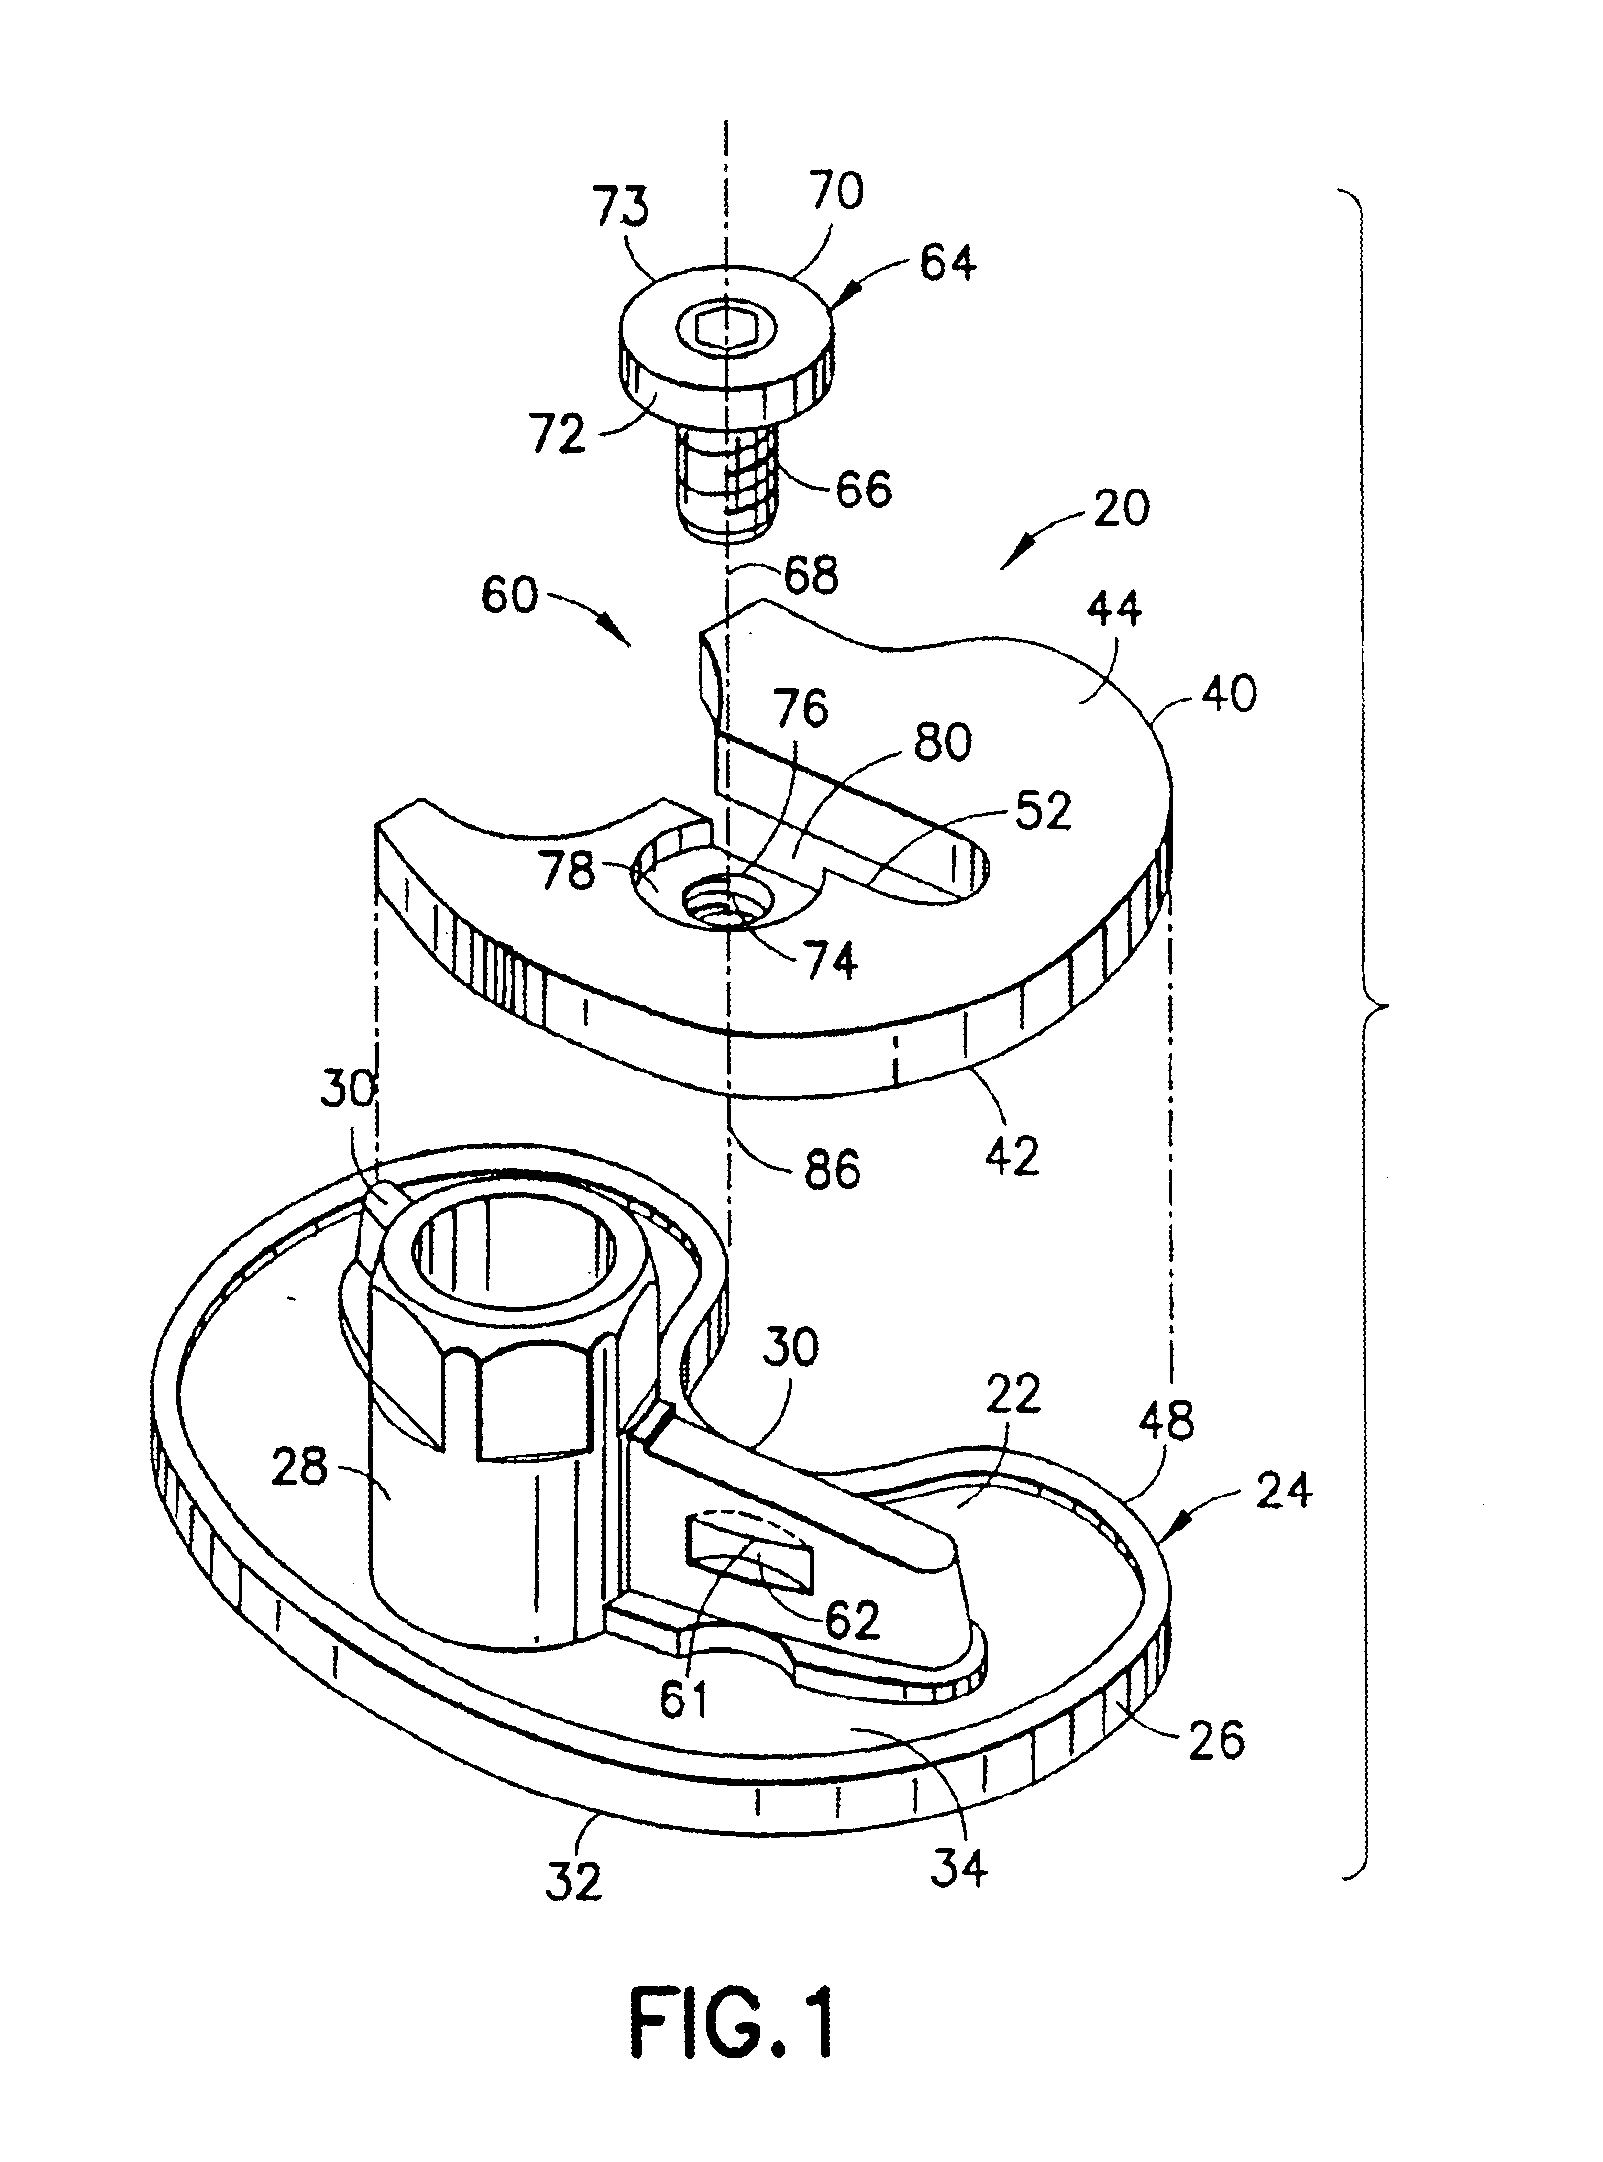 Securing an augment to a prosthetic implant component